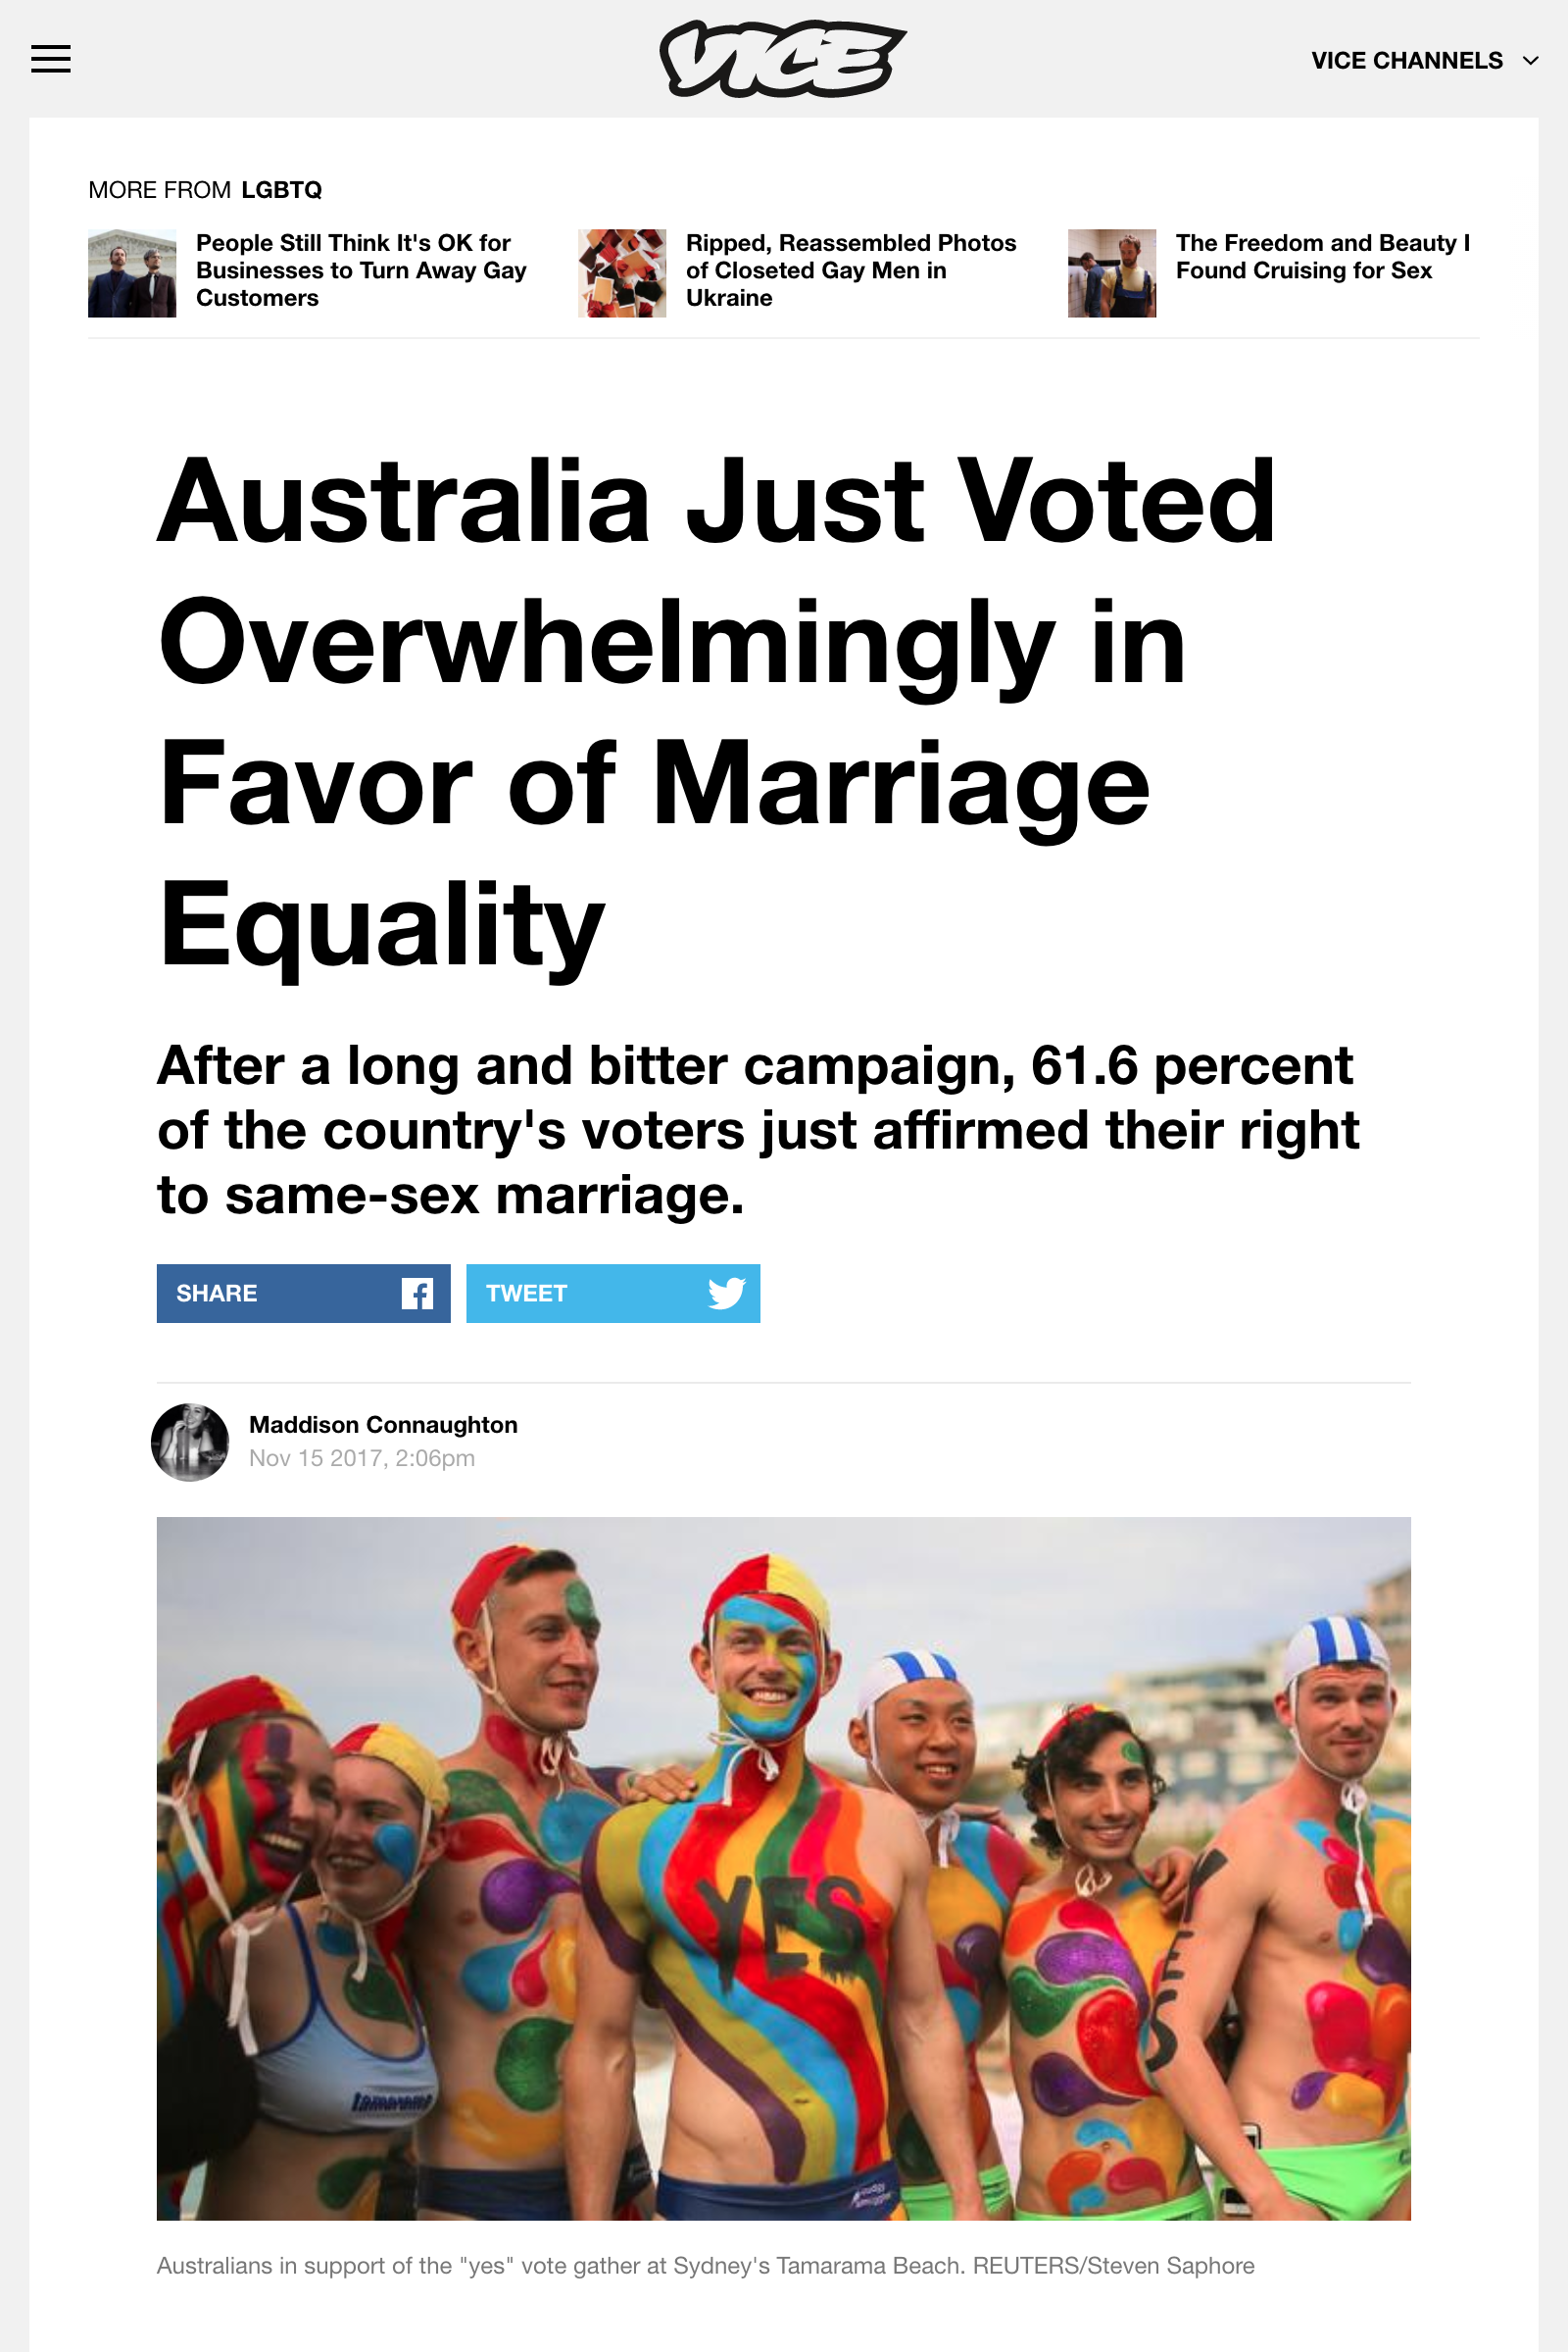 www.vice.com_en_us_article_43n8gb_australia-just-voted-overwhelmingly-in-favor-of-marriage-equality (1).png